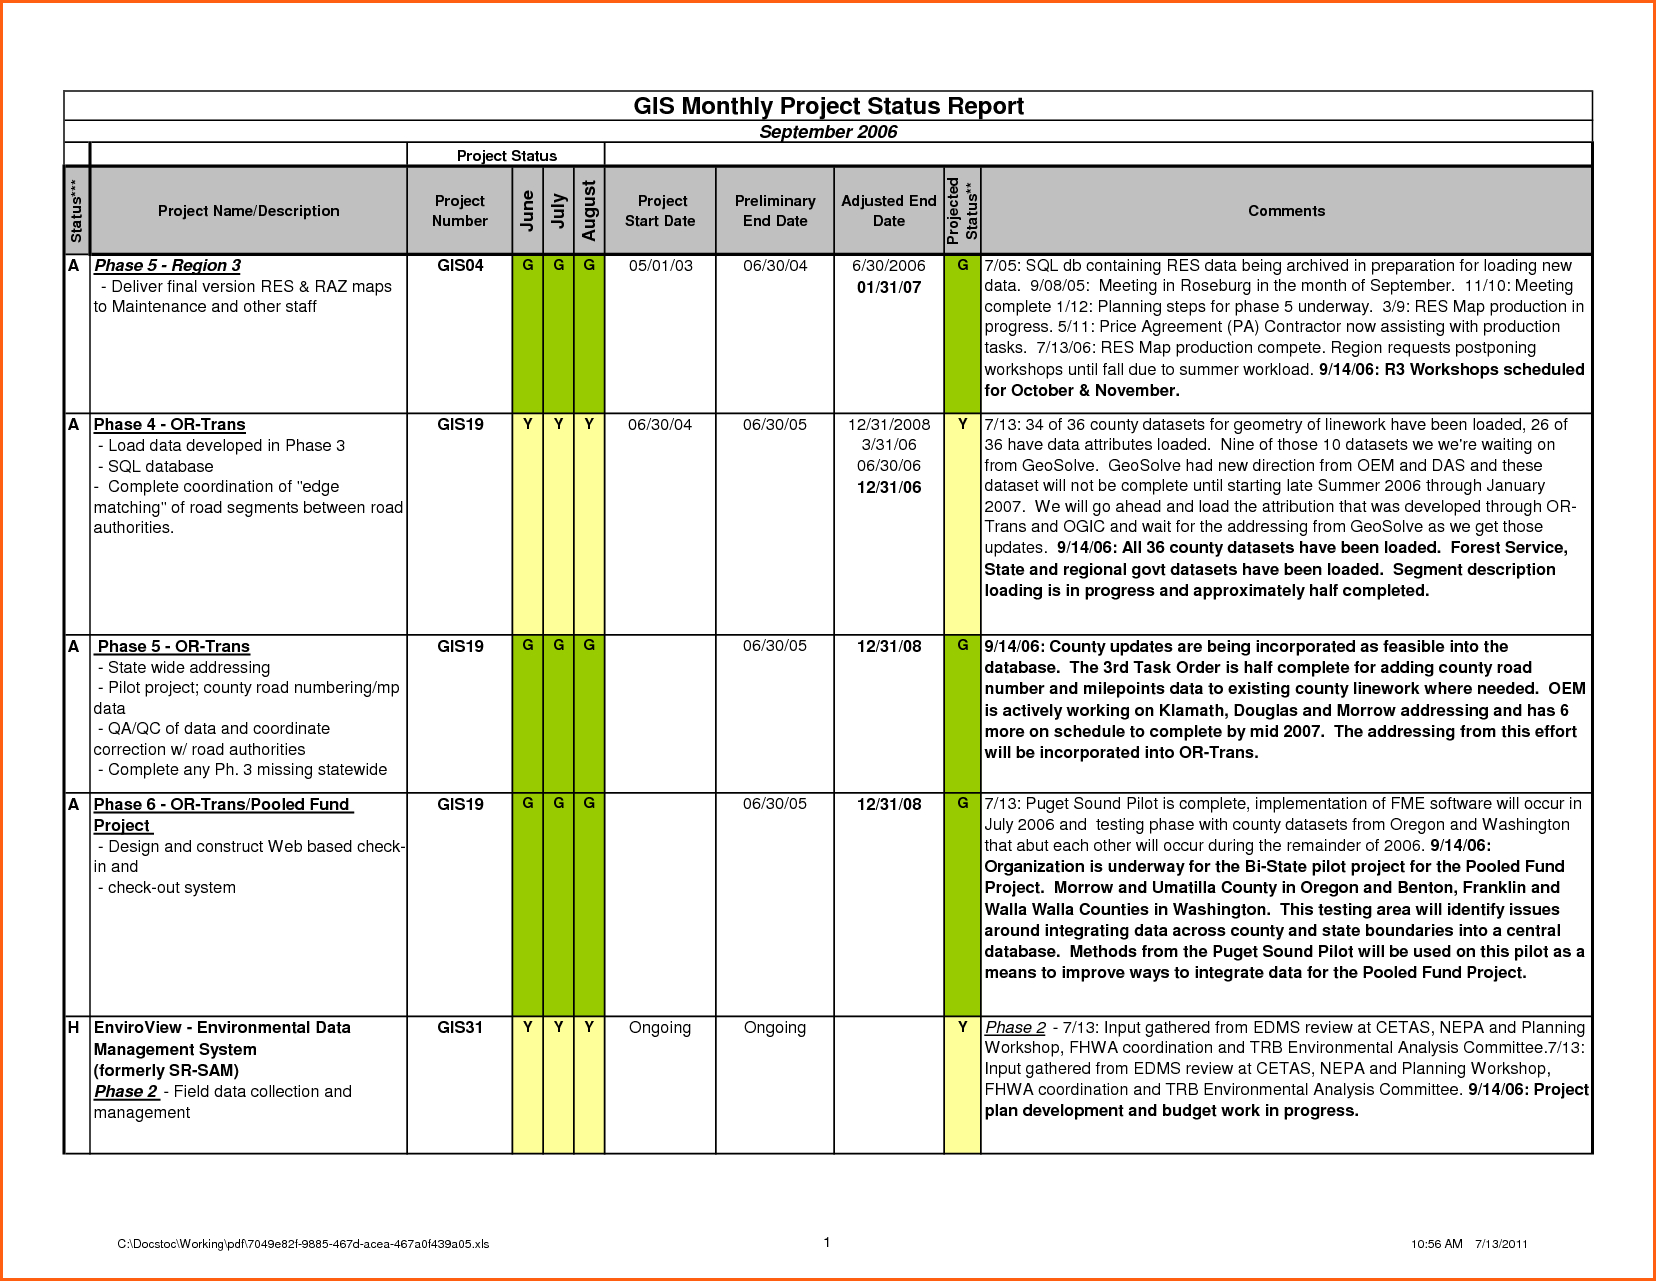 Project Status Report Template Excel Download Filetype Xls With Regard To Project Status Report Template Excel Download Filetype Xls